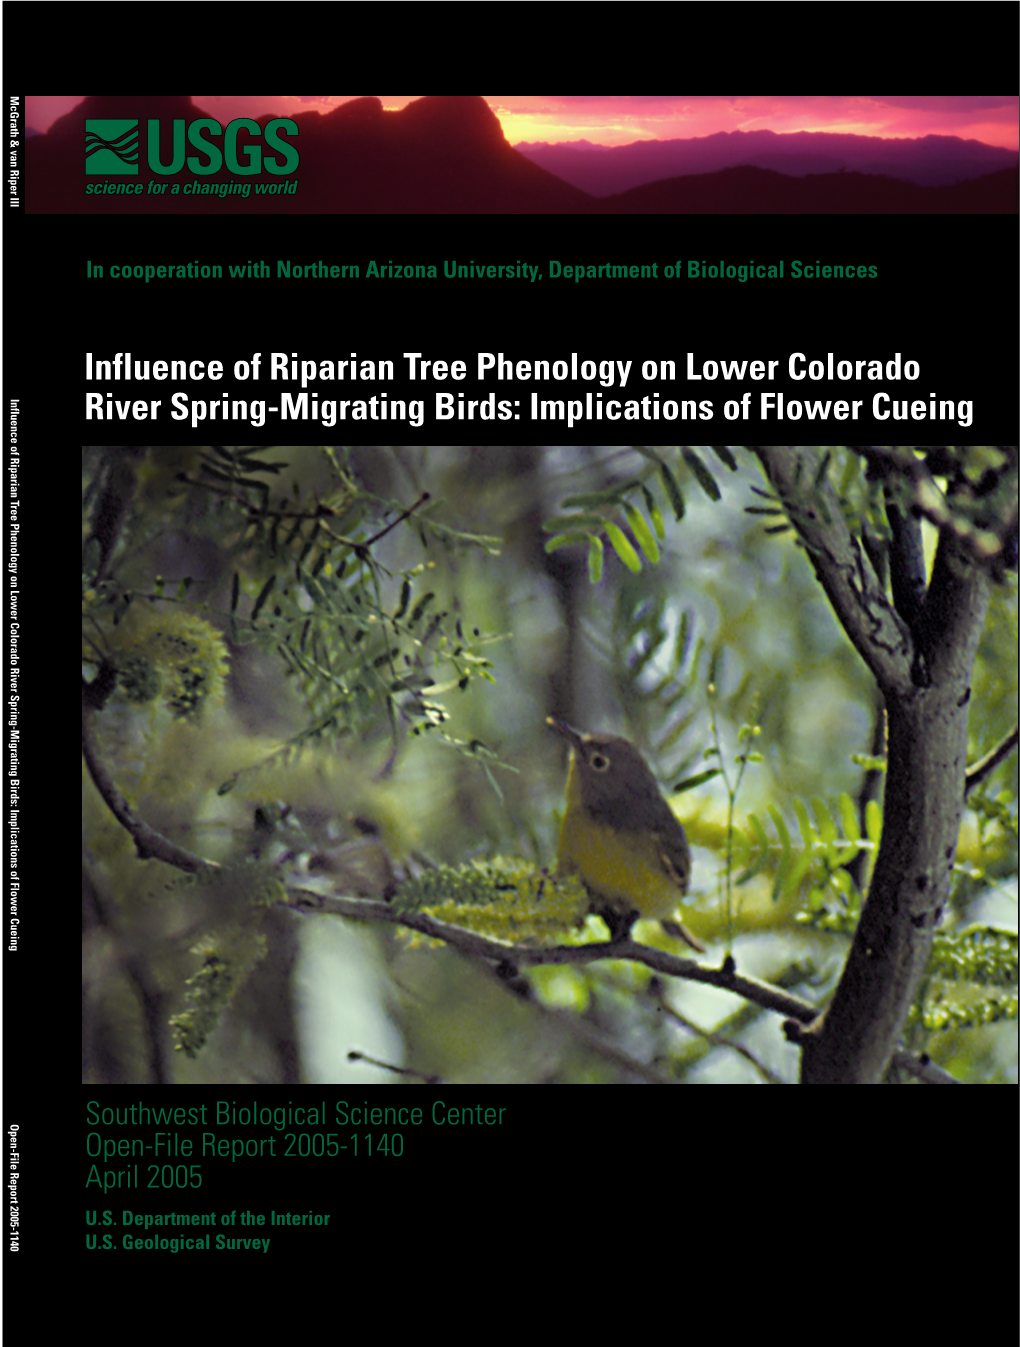 Influence of Riparian Tree Phenology on Lower Colorado River Spring